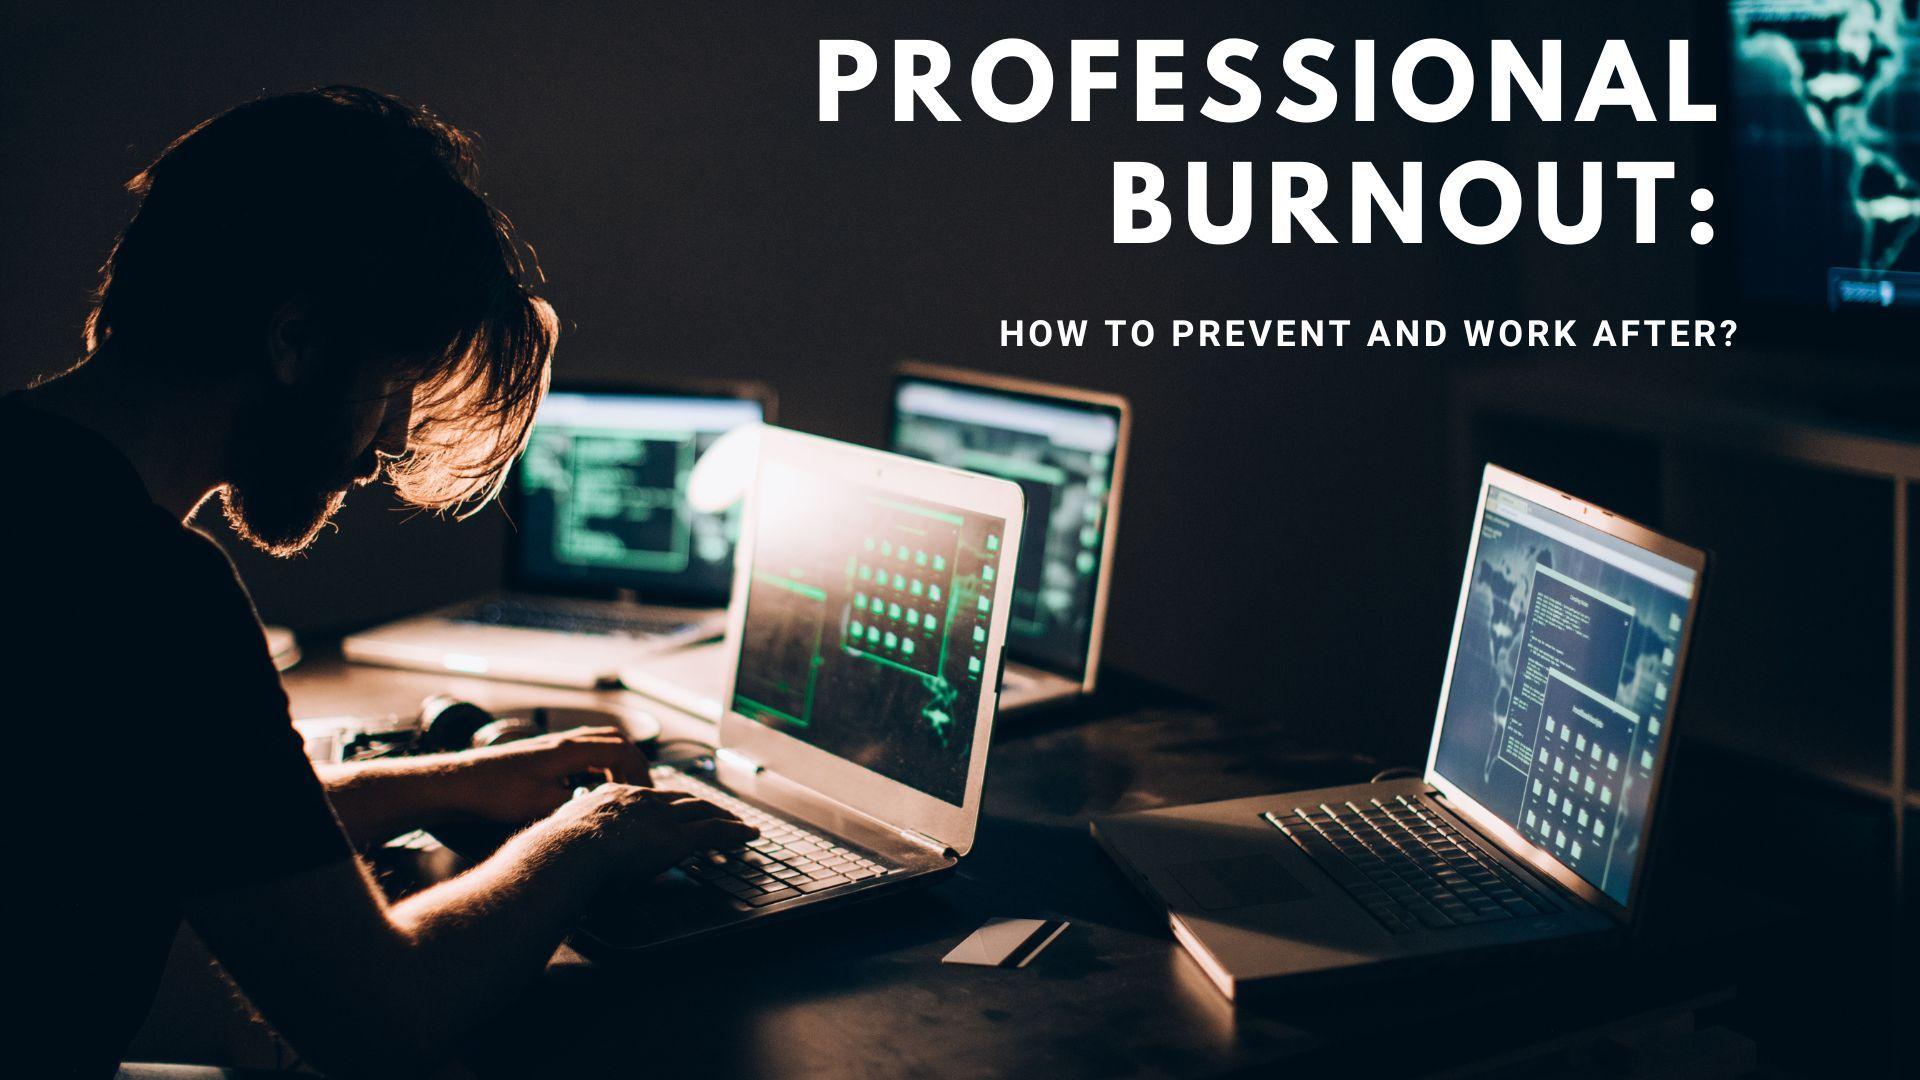 Professional burnout: how to prevent and work after?